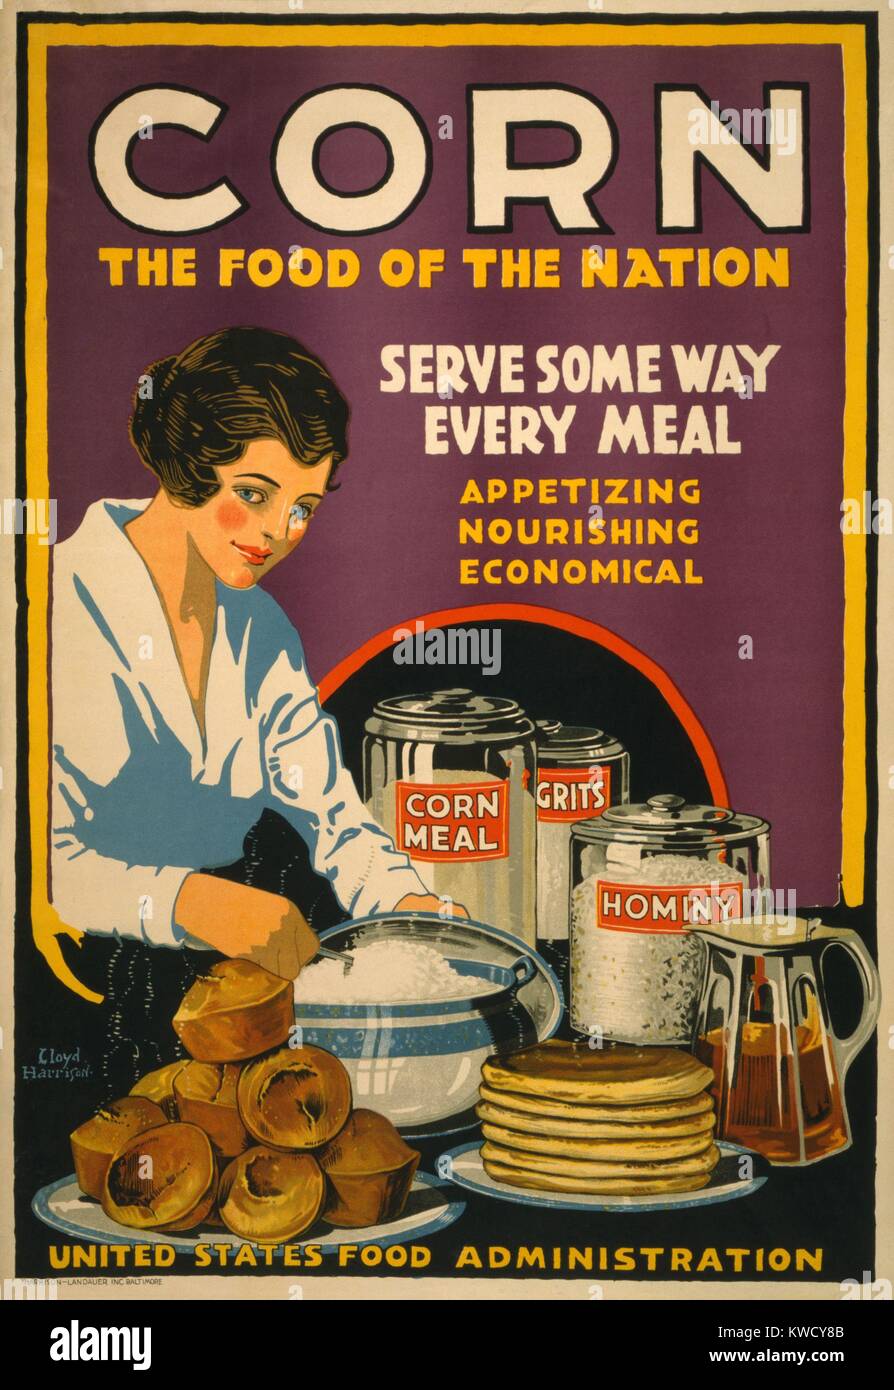 CORN-FOOD OF THE NATION. American World War 1 poster promoting corn in 1918. Wheat conservation was necessary to feed America’s growing Army, and to relieve famine in Europe (BSLOC 2017 1 57) Stock Photo